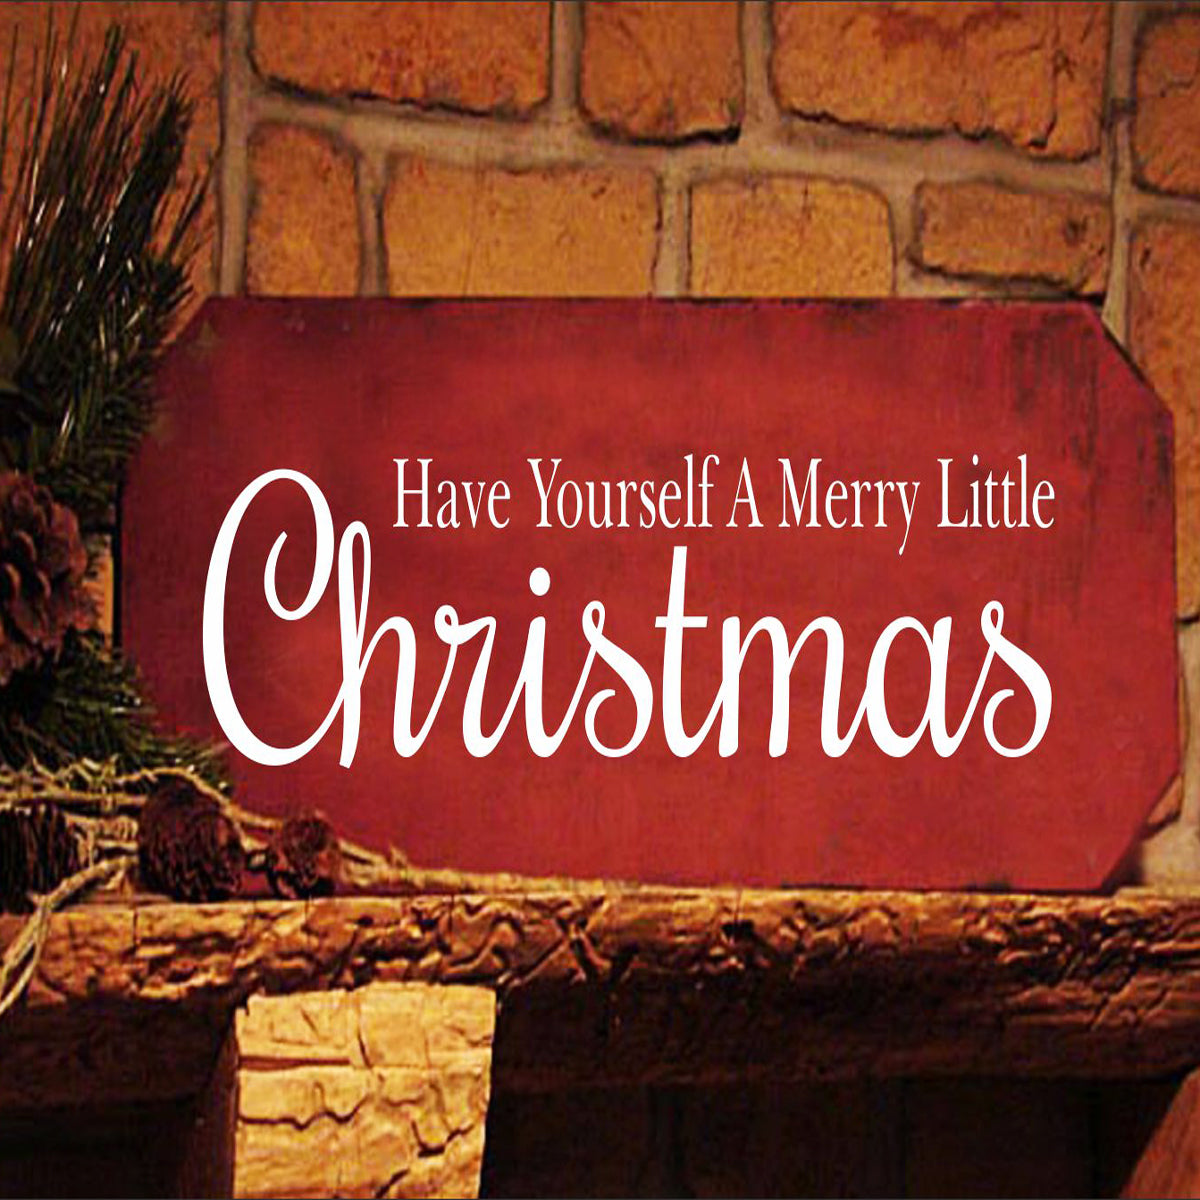 Have Yourself a Merry Little Christmas Stencil 01 - Superior Stencils